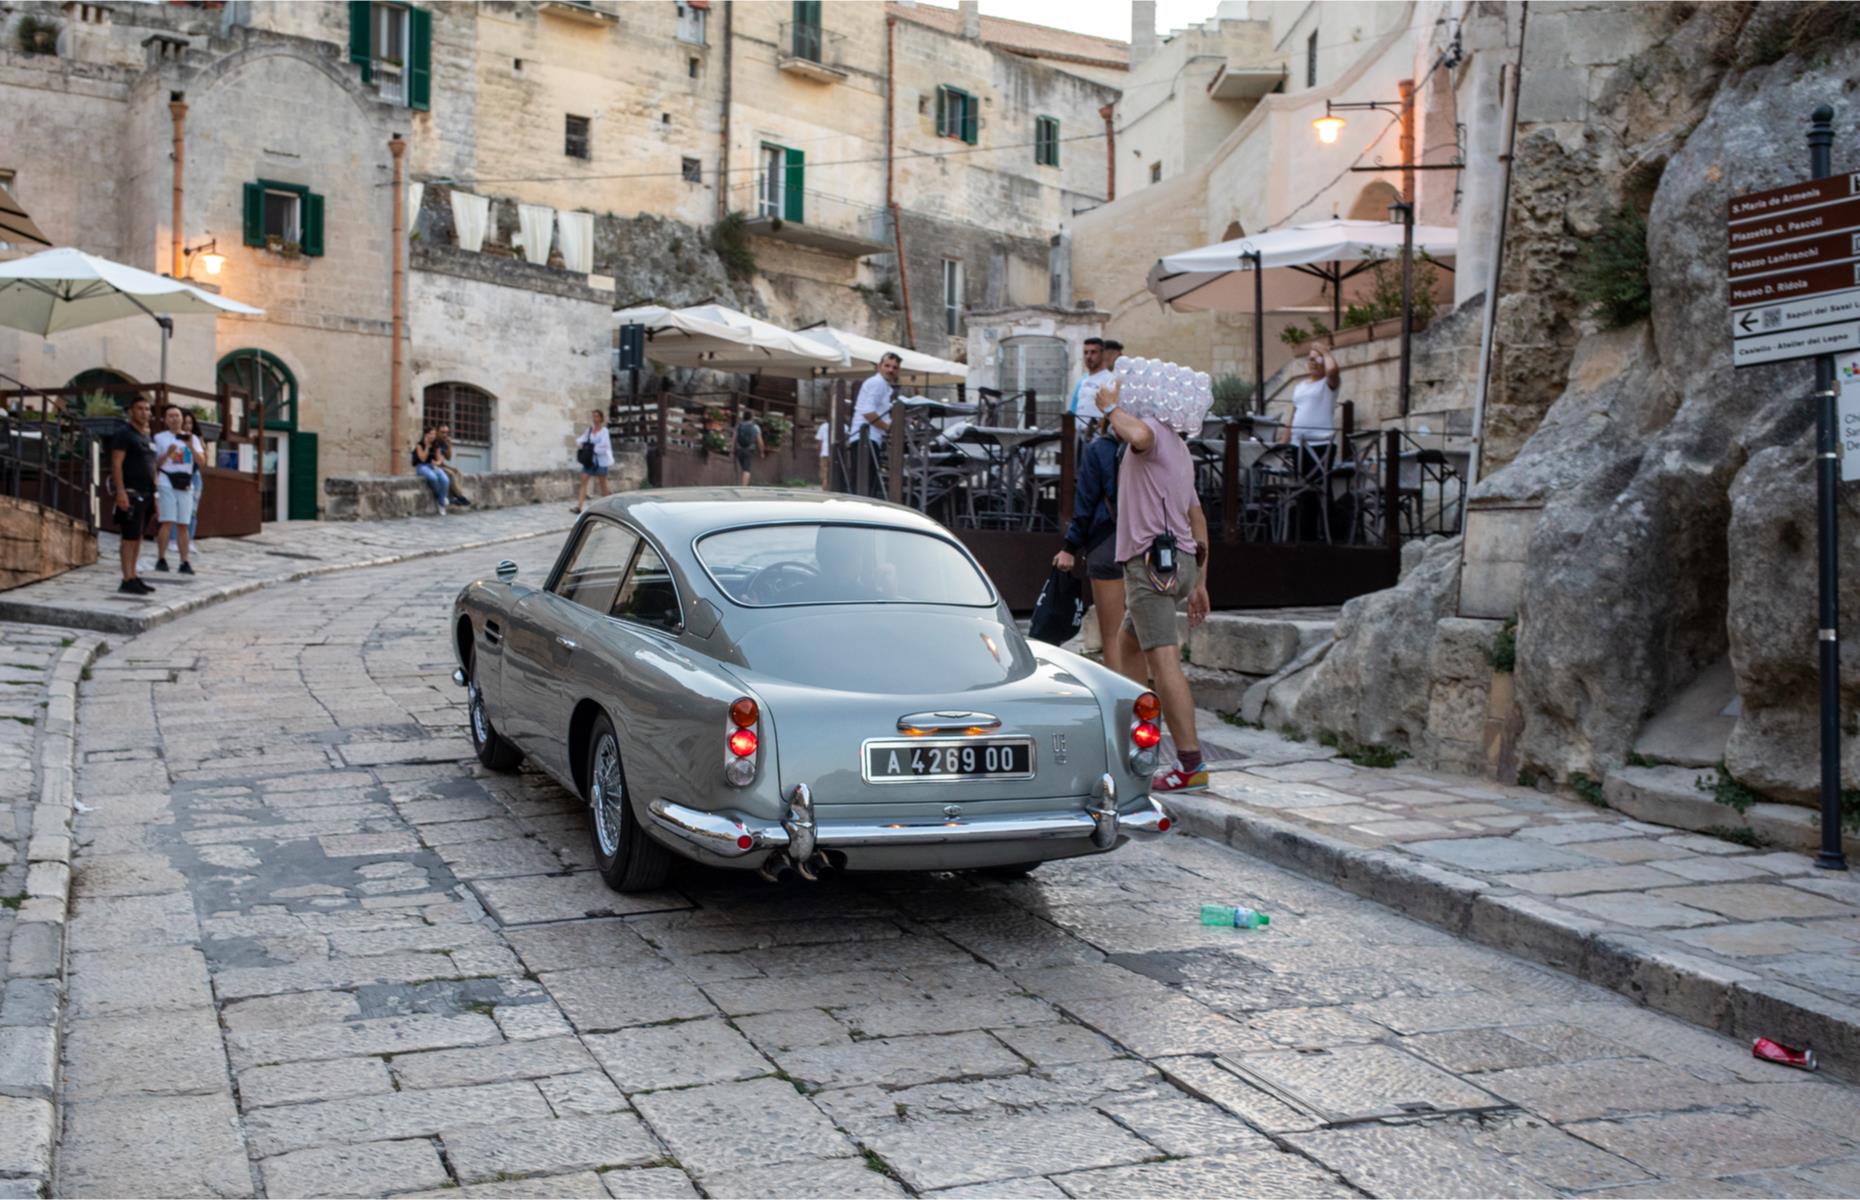 <p>The UNESCO World Heritage Site is the setting for a high-speed car chase scene, naturally featuring the secret agent’s Aston Martin (pictured here during filming). Matera's 13th-century Romanesque cathedral and sassi districts are a spectacular backdrop. The Sasso Caveoso and Sasso Barisano quarters were once makeshift homes for the town’s underprivileged: now these age-old dwellings house restaurants, bars and hotels, including the charming <a href="https://www.sextantio.it/en/legrottedellacivita/matera/">Sextantio Le Grotte della Civita</a>. There are also more than 100 rock-hewn churches including the largest, 12th-century Chiesa San Pietro Barisano.</p>  <p><a href="https://www.loveexploring.com/gallerylist/73233/filming-movie-locations-usa"><strong>Now check out the most famous movie locations in every US state</strong></a></p>